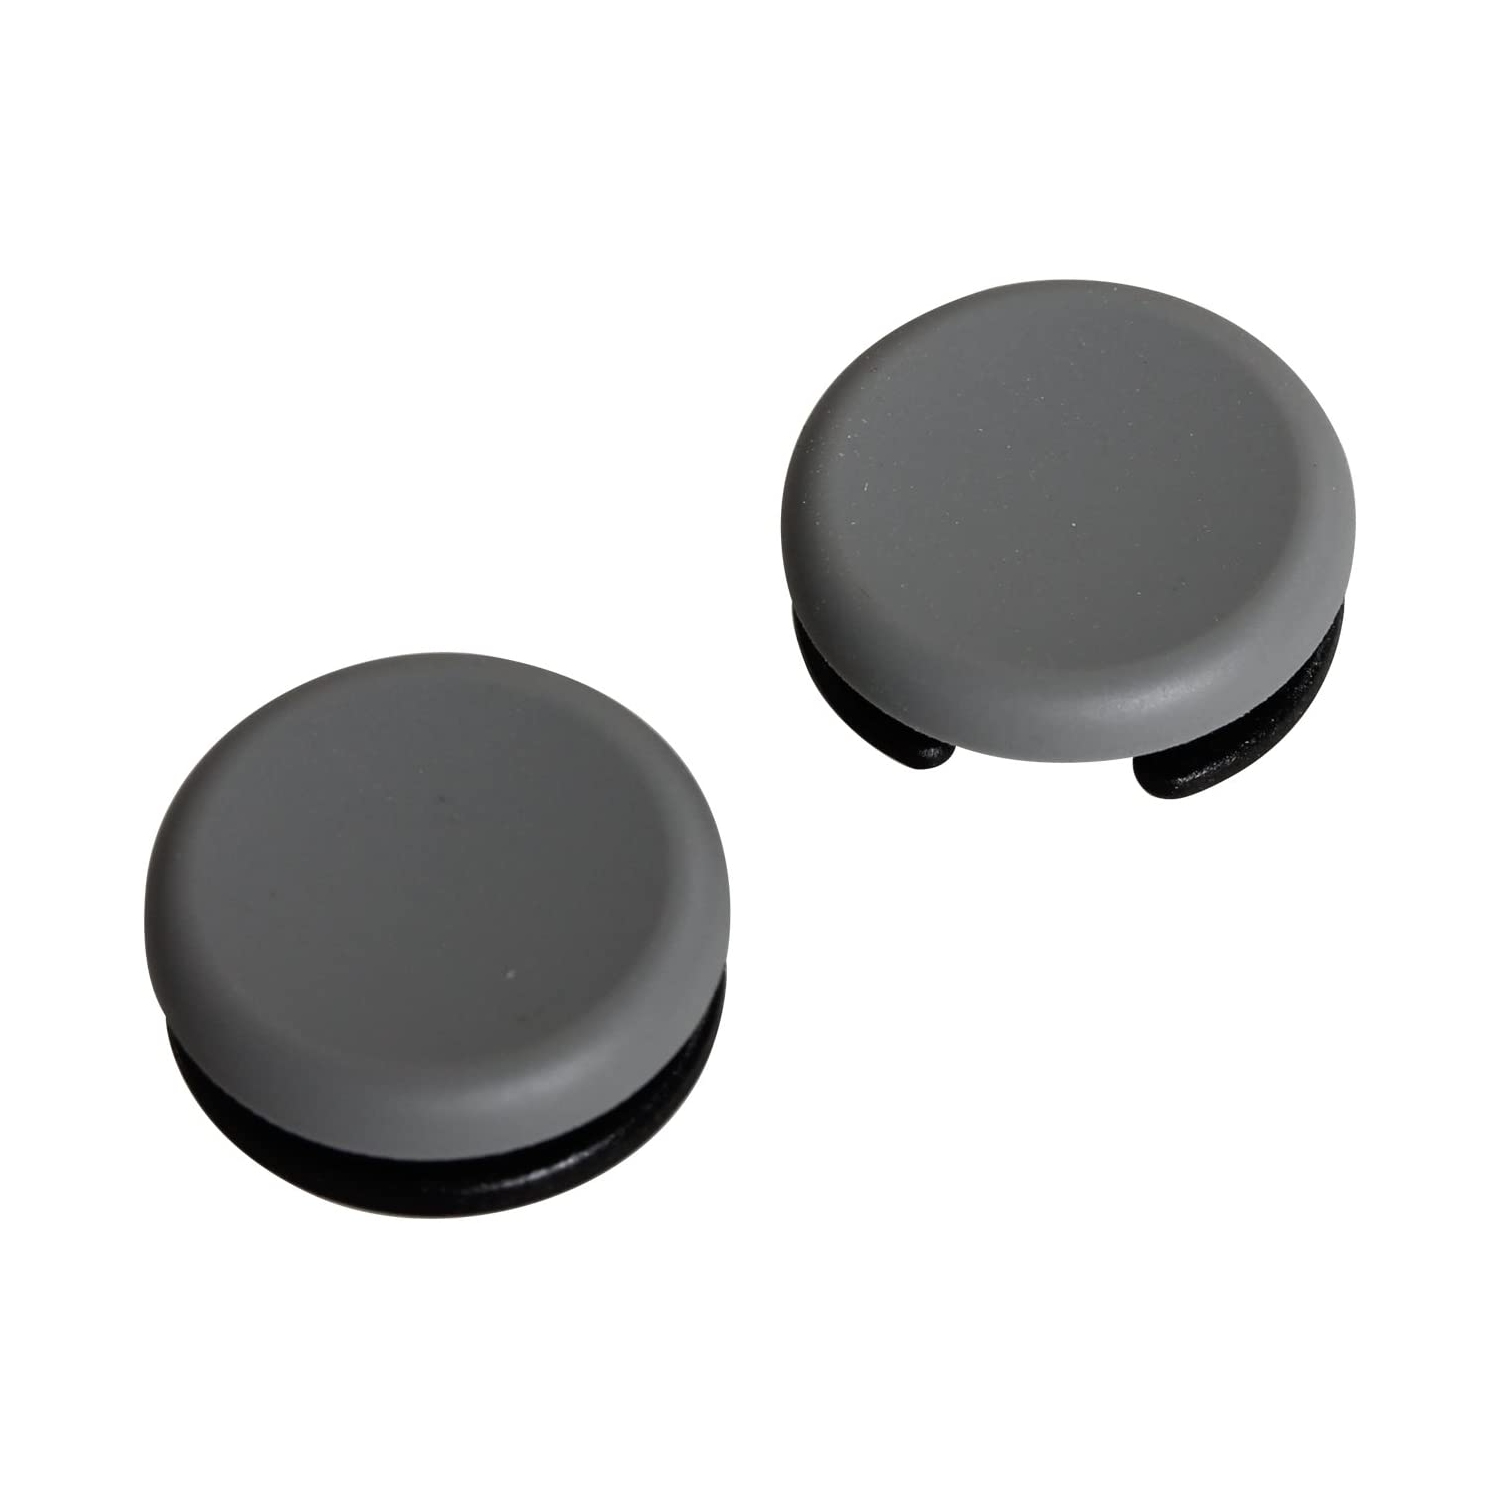 Analog Stick Cap Replacement 3D Joystick Cover for New 3DS / 3DS / 3DSLL / 3DSXL Controller (Gray)